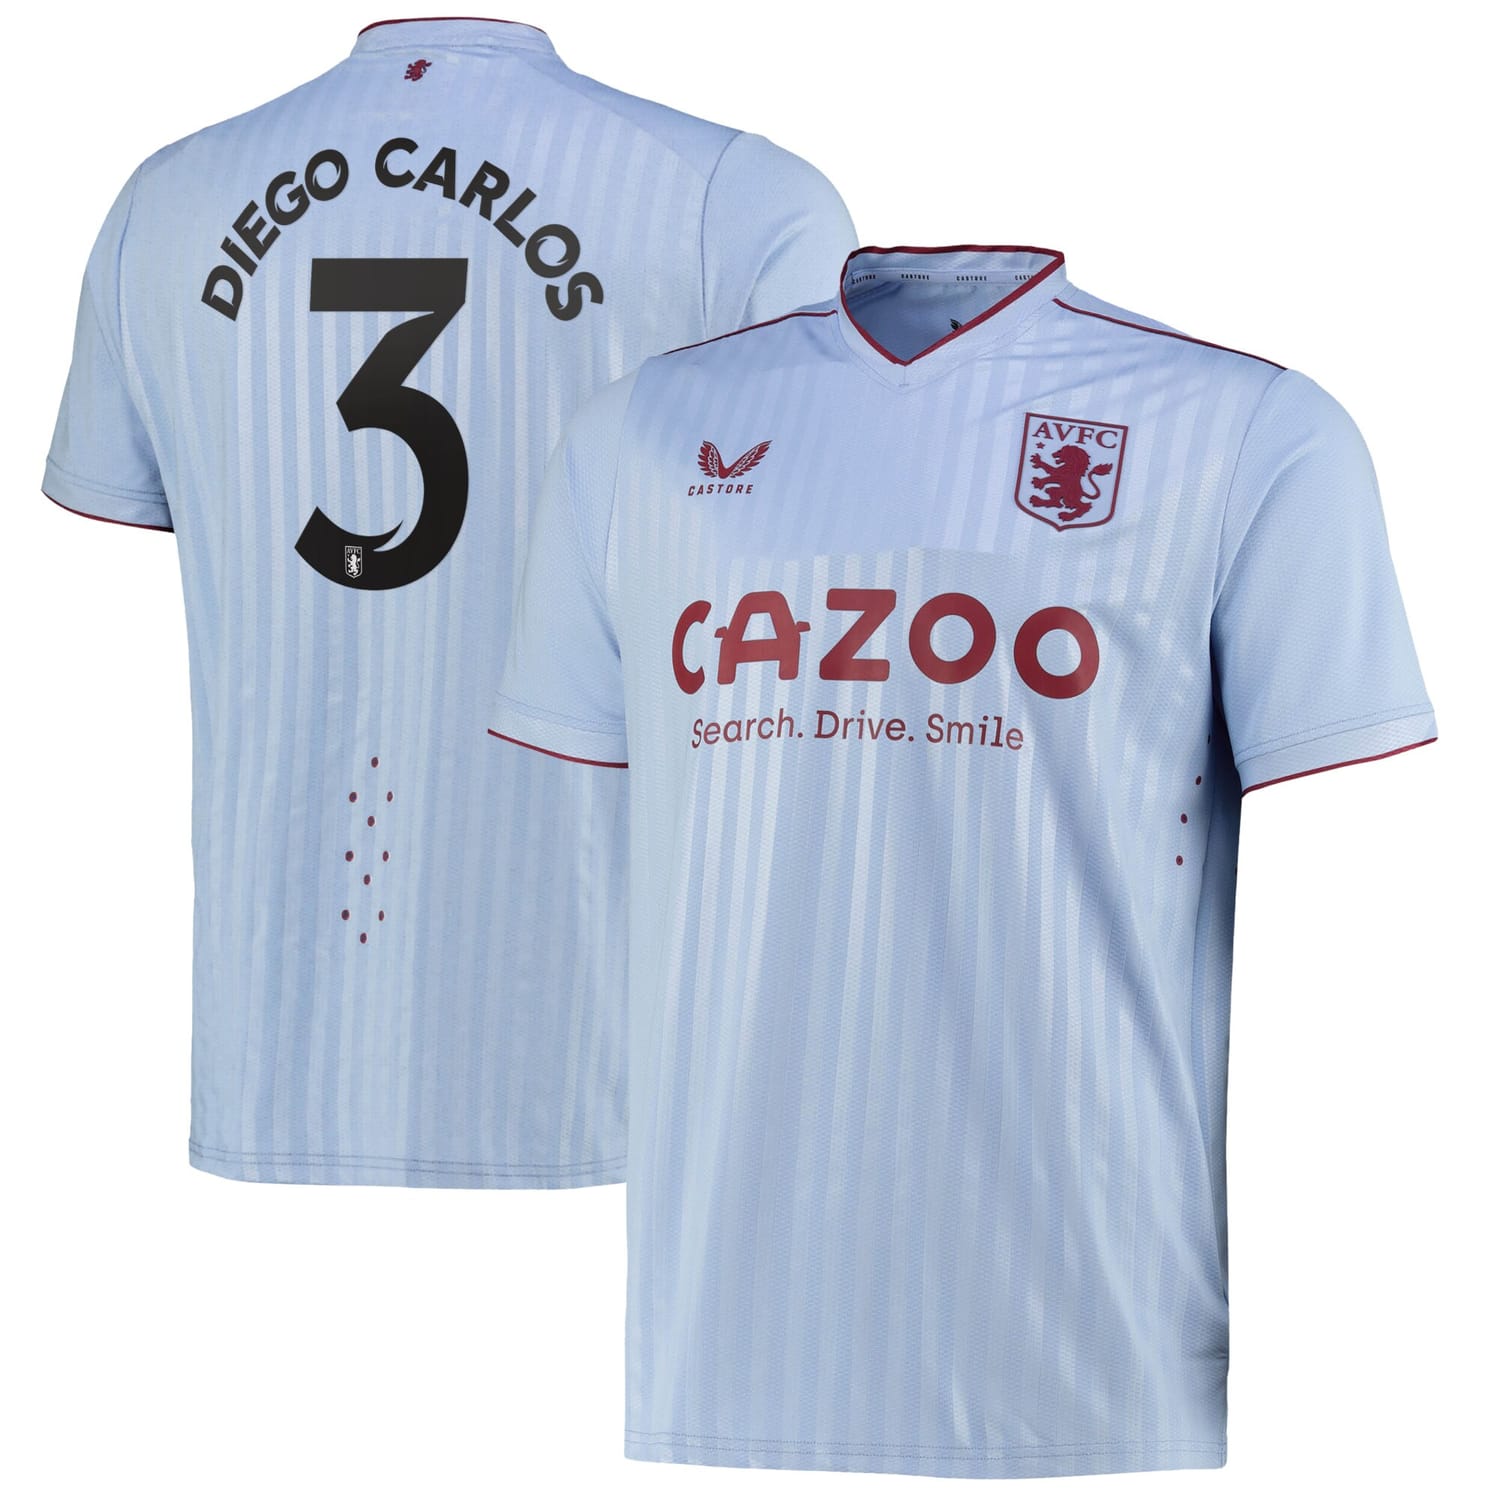 Premier League Aston Villa Away Cup Pro Jersey Shirt 2022-23 player Diego Carlos 3 printing for Men